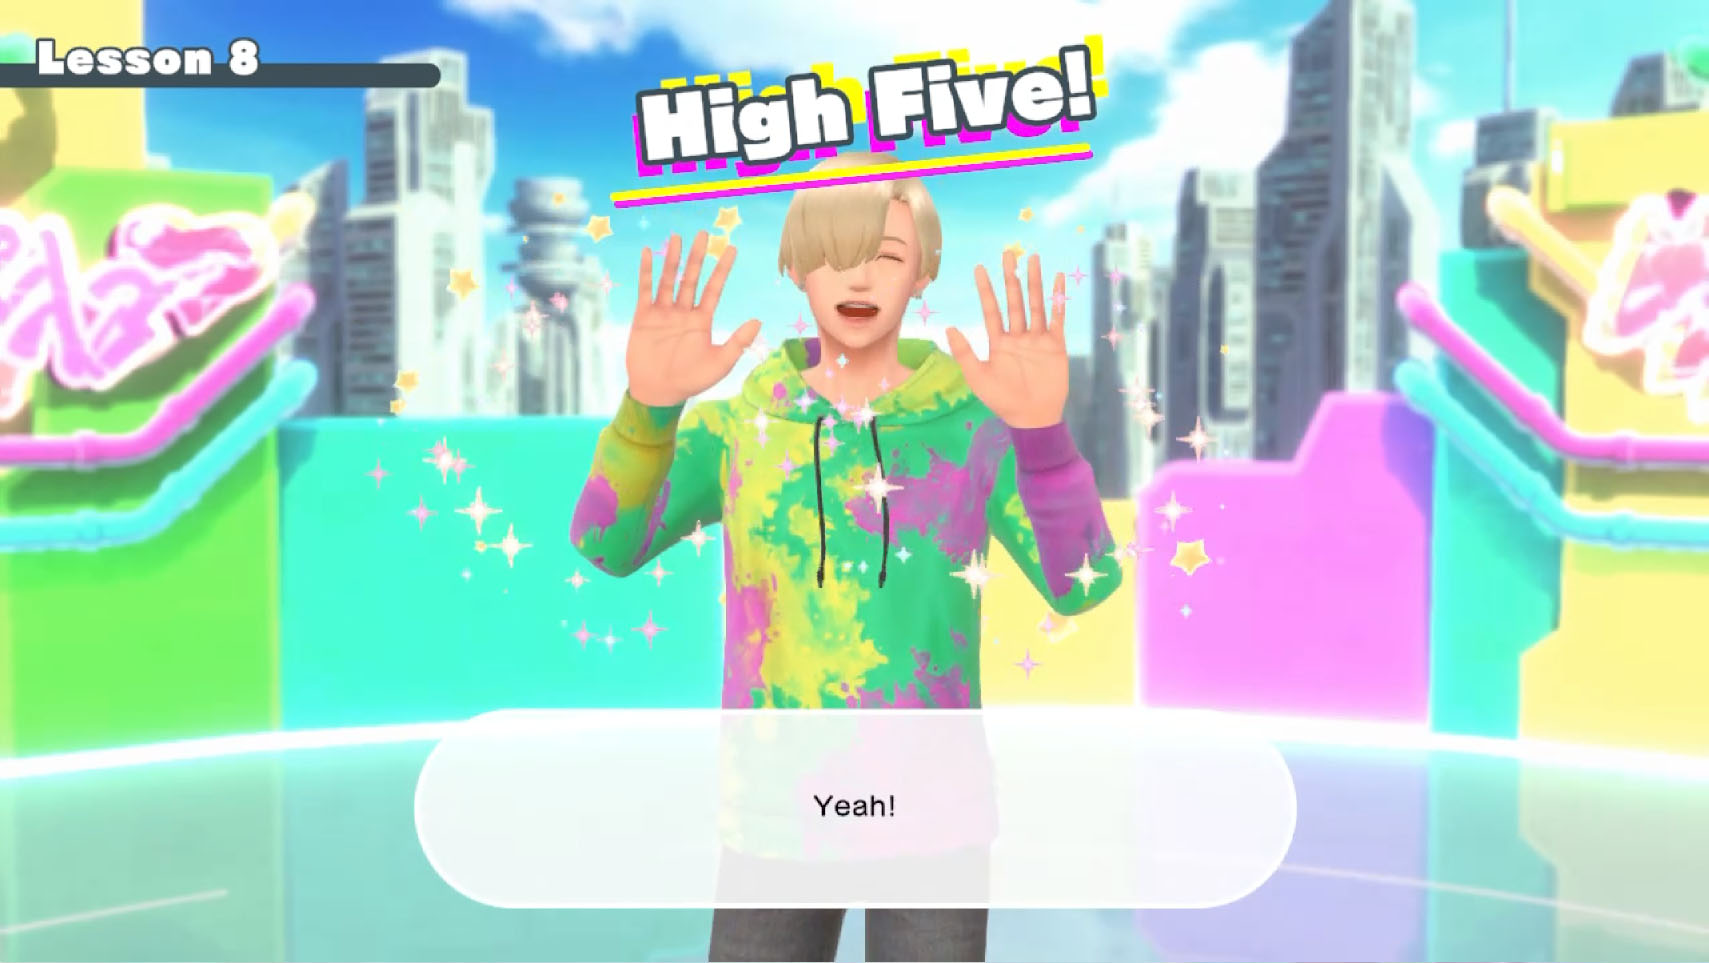 Finish the lesson with a high five from your instructor!